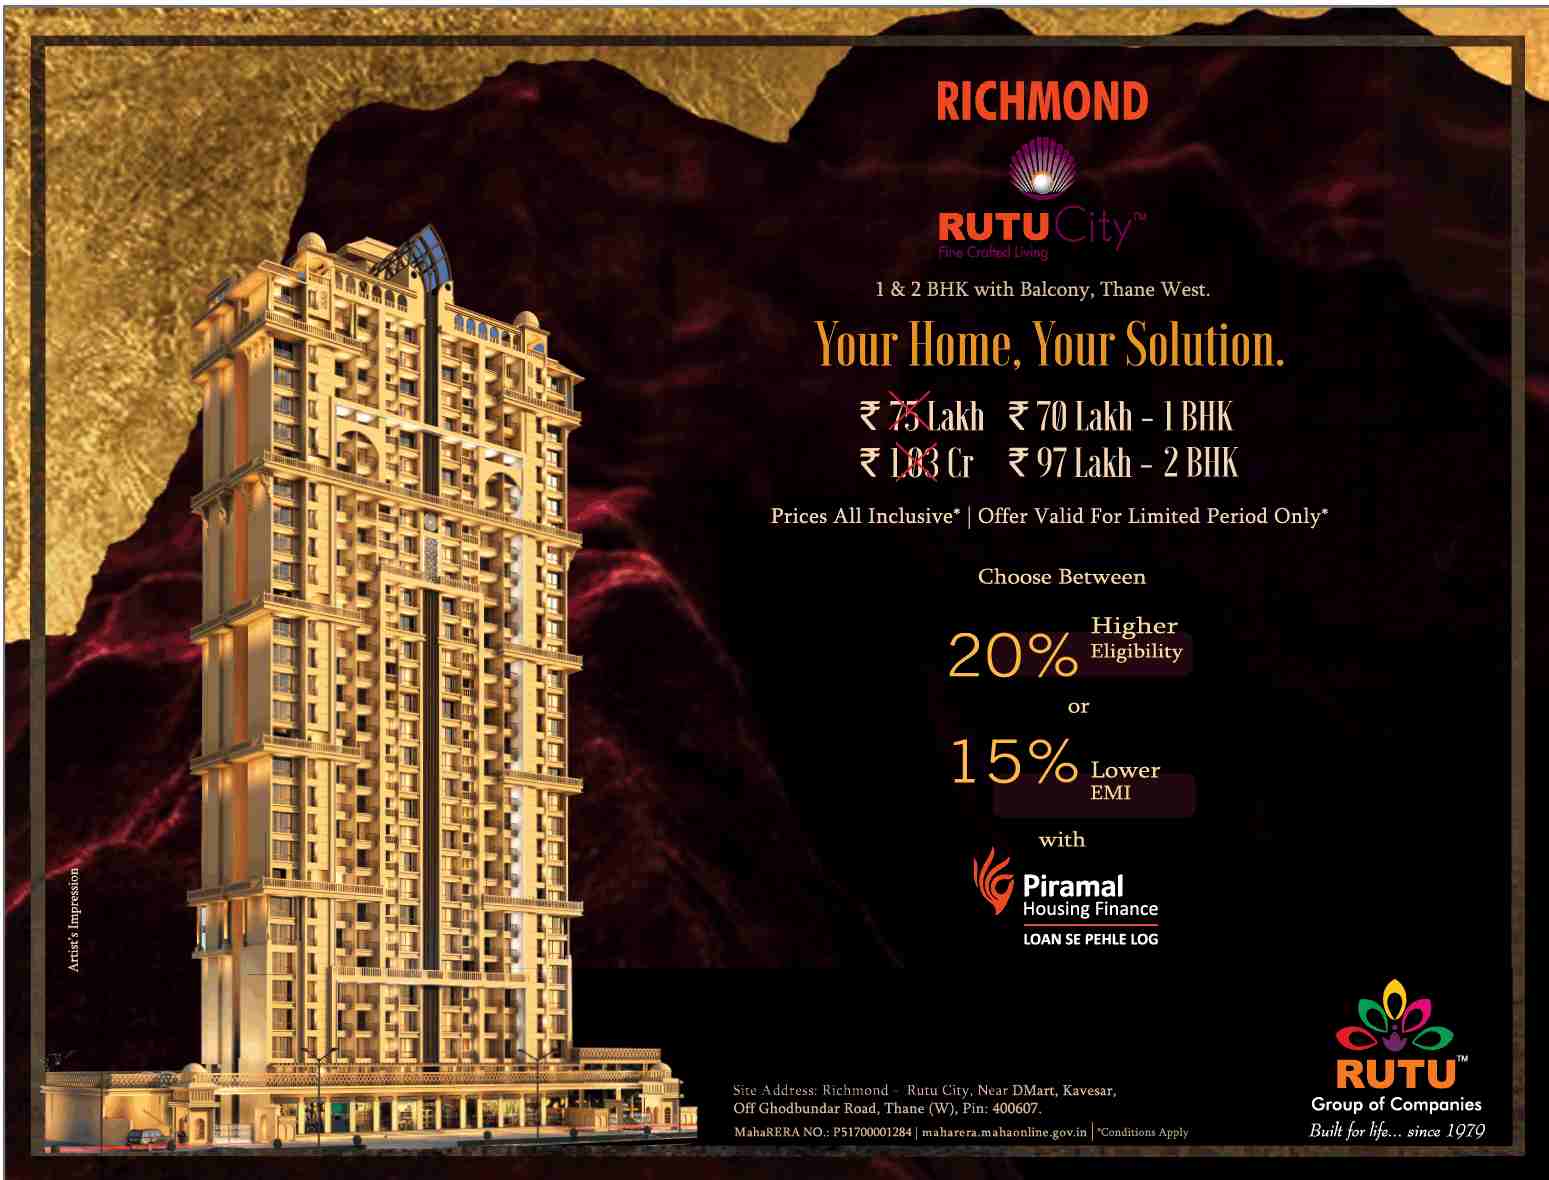 Choose between 20% higher eligibility or 15% lower EMI at Rutu Richmond in Mumbai